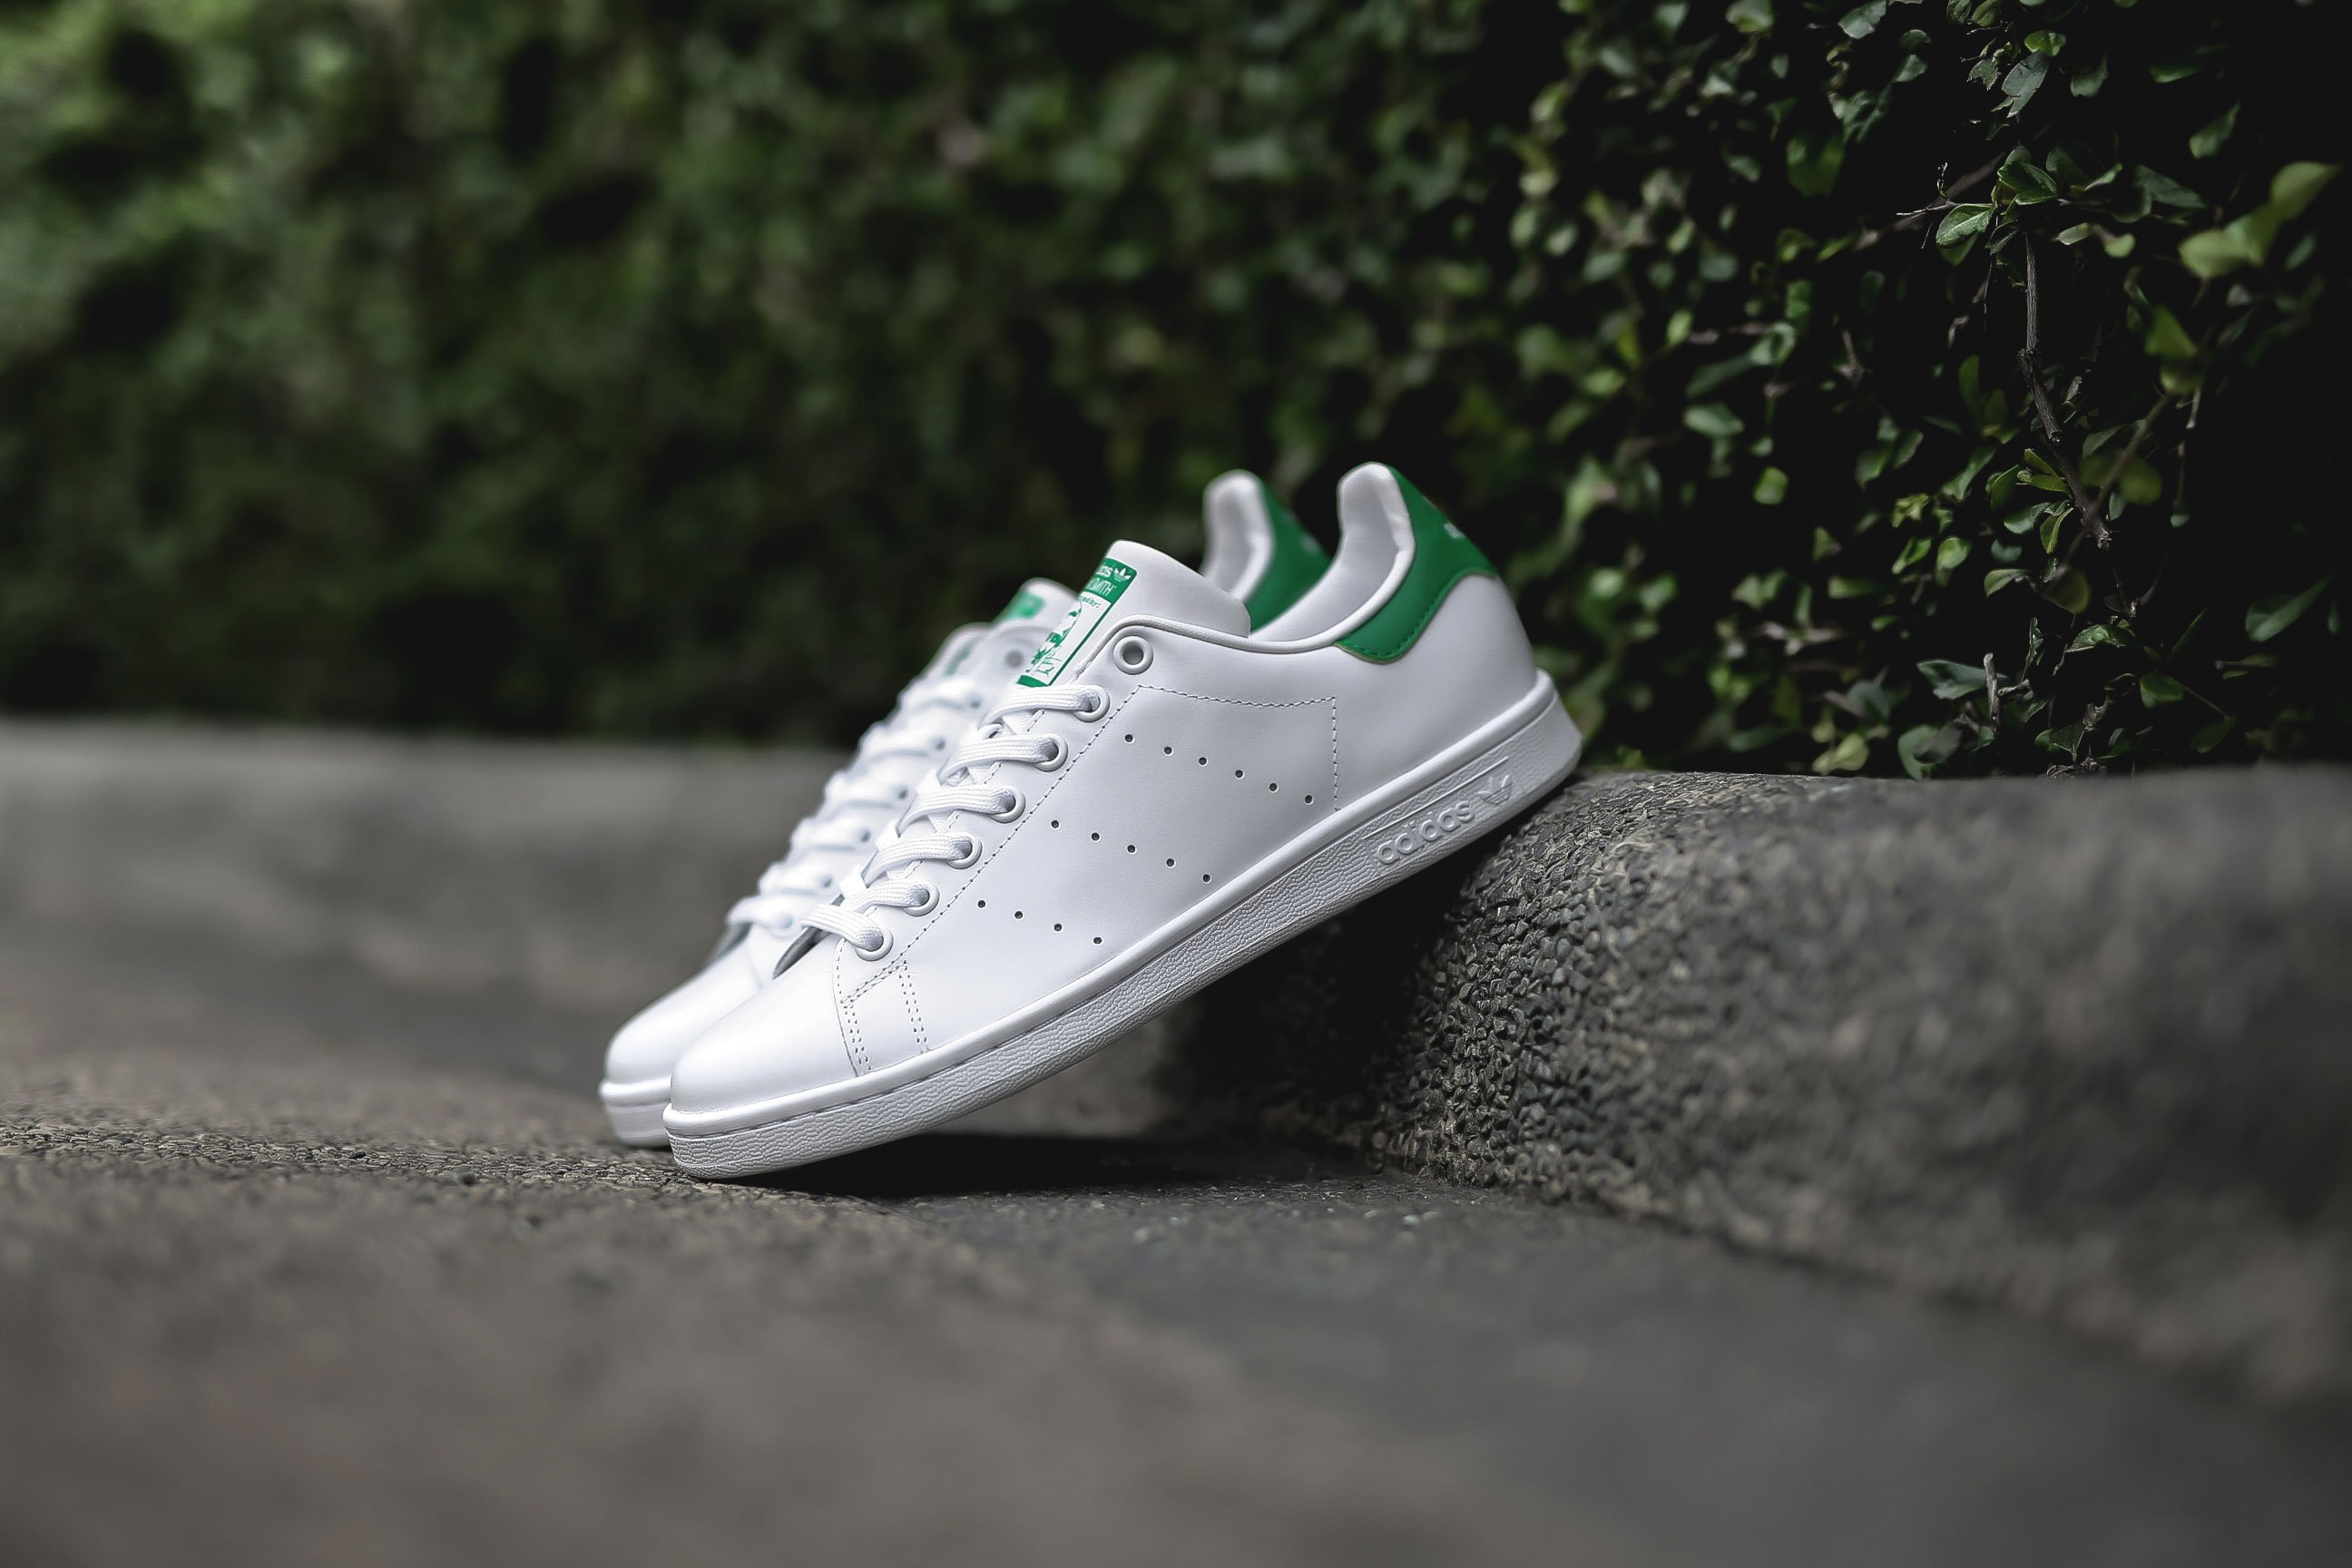 CROSSOVER on Twitter: "adidas Originals Stan Smith, all time since 1971, dressed in white leather and green heel in all #CROSSOVER and Online https://t.co/2uJFYaeGQG" / Twitter